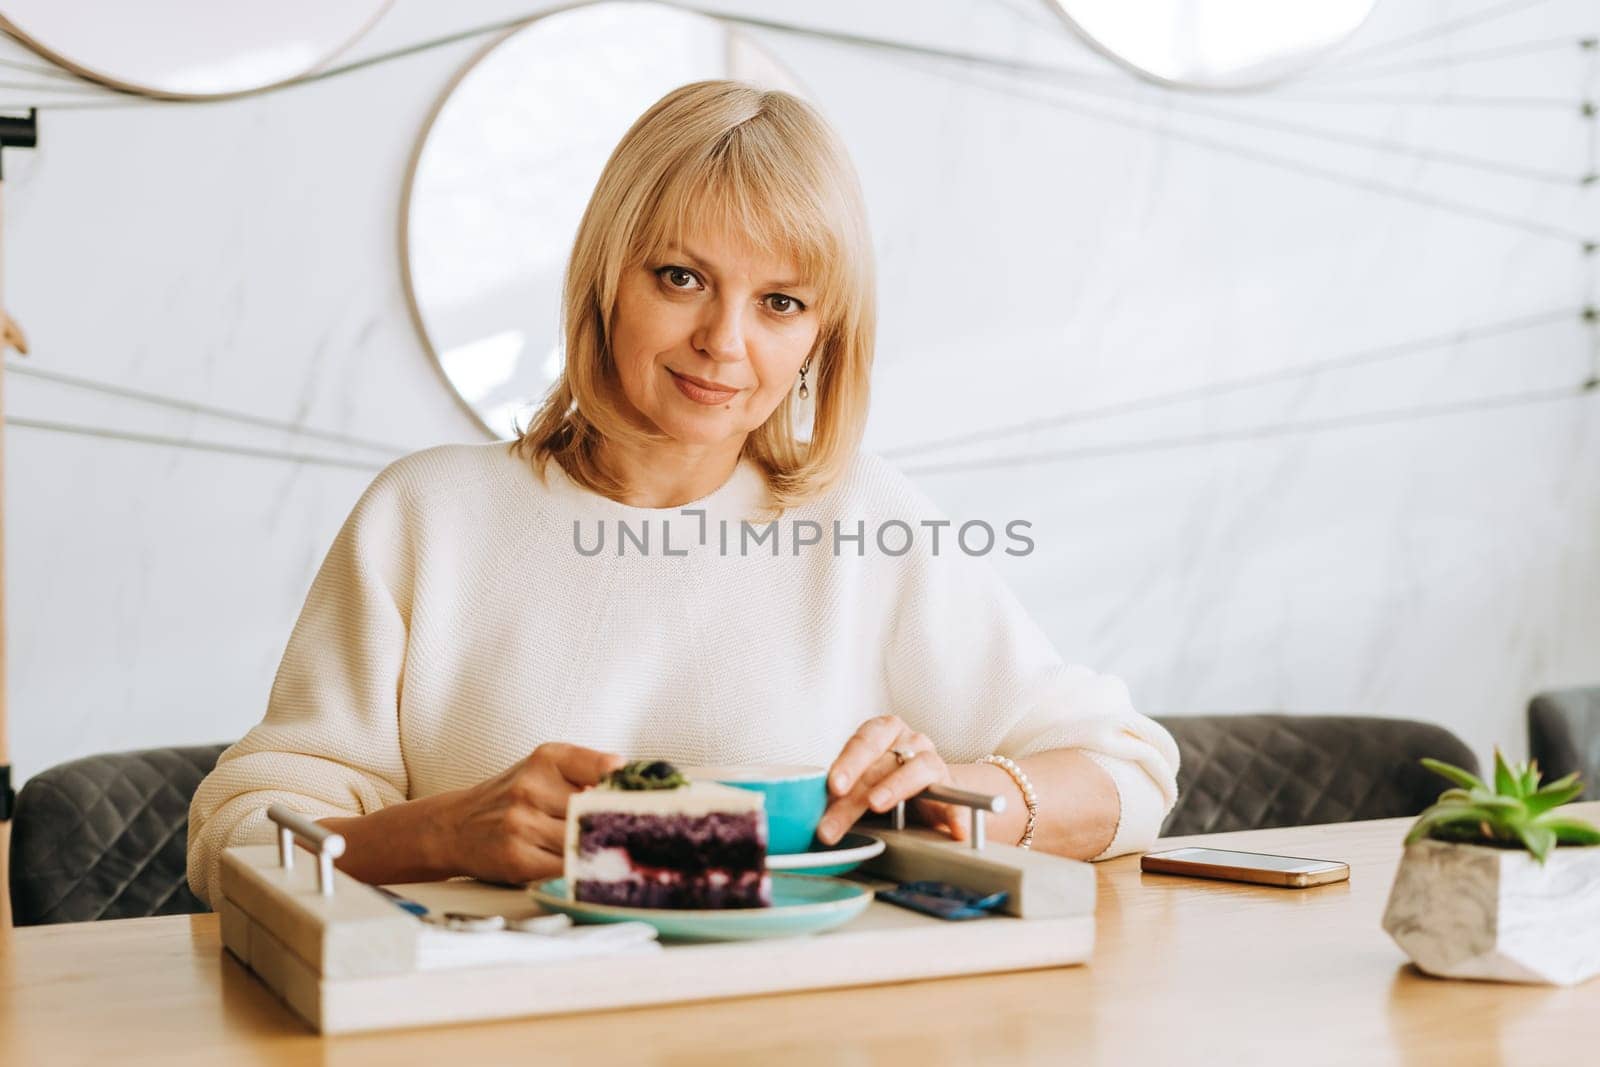 Mature woman holding a cup of cappuccino coffee and a cream cake. Adult lady in white sweater enjoying her breakfast latte and dessert pie on a wooden tray in a cafe.